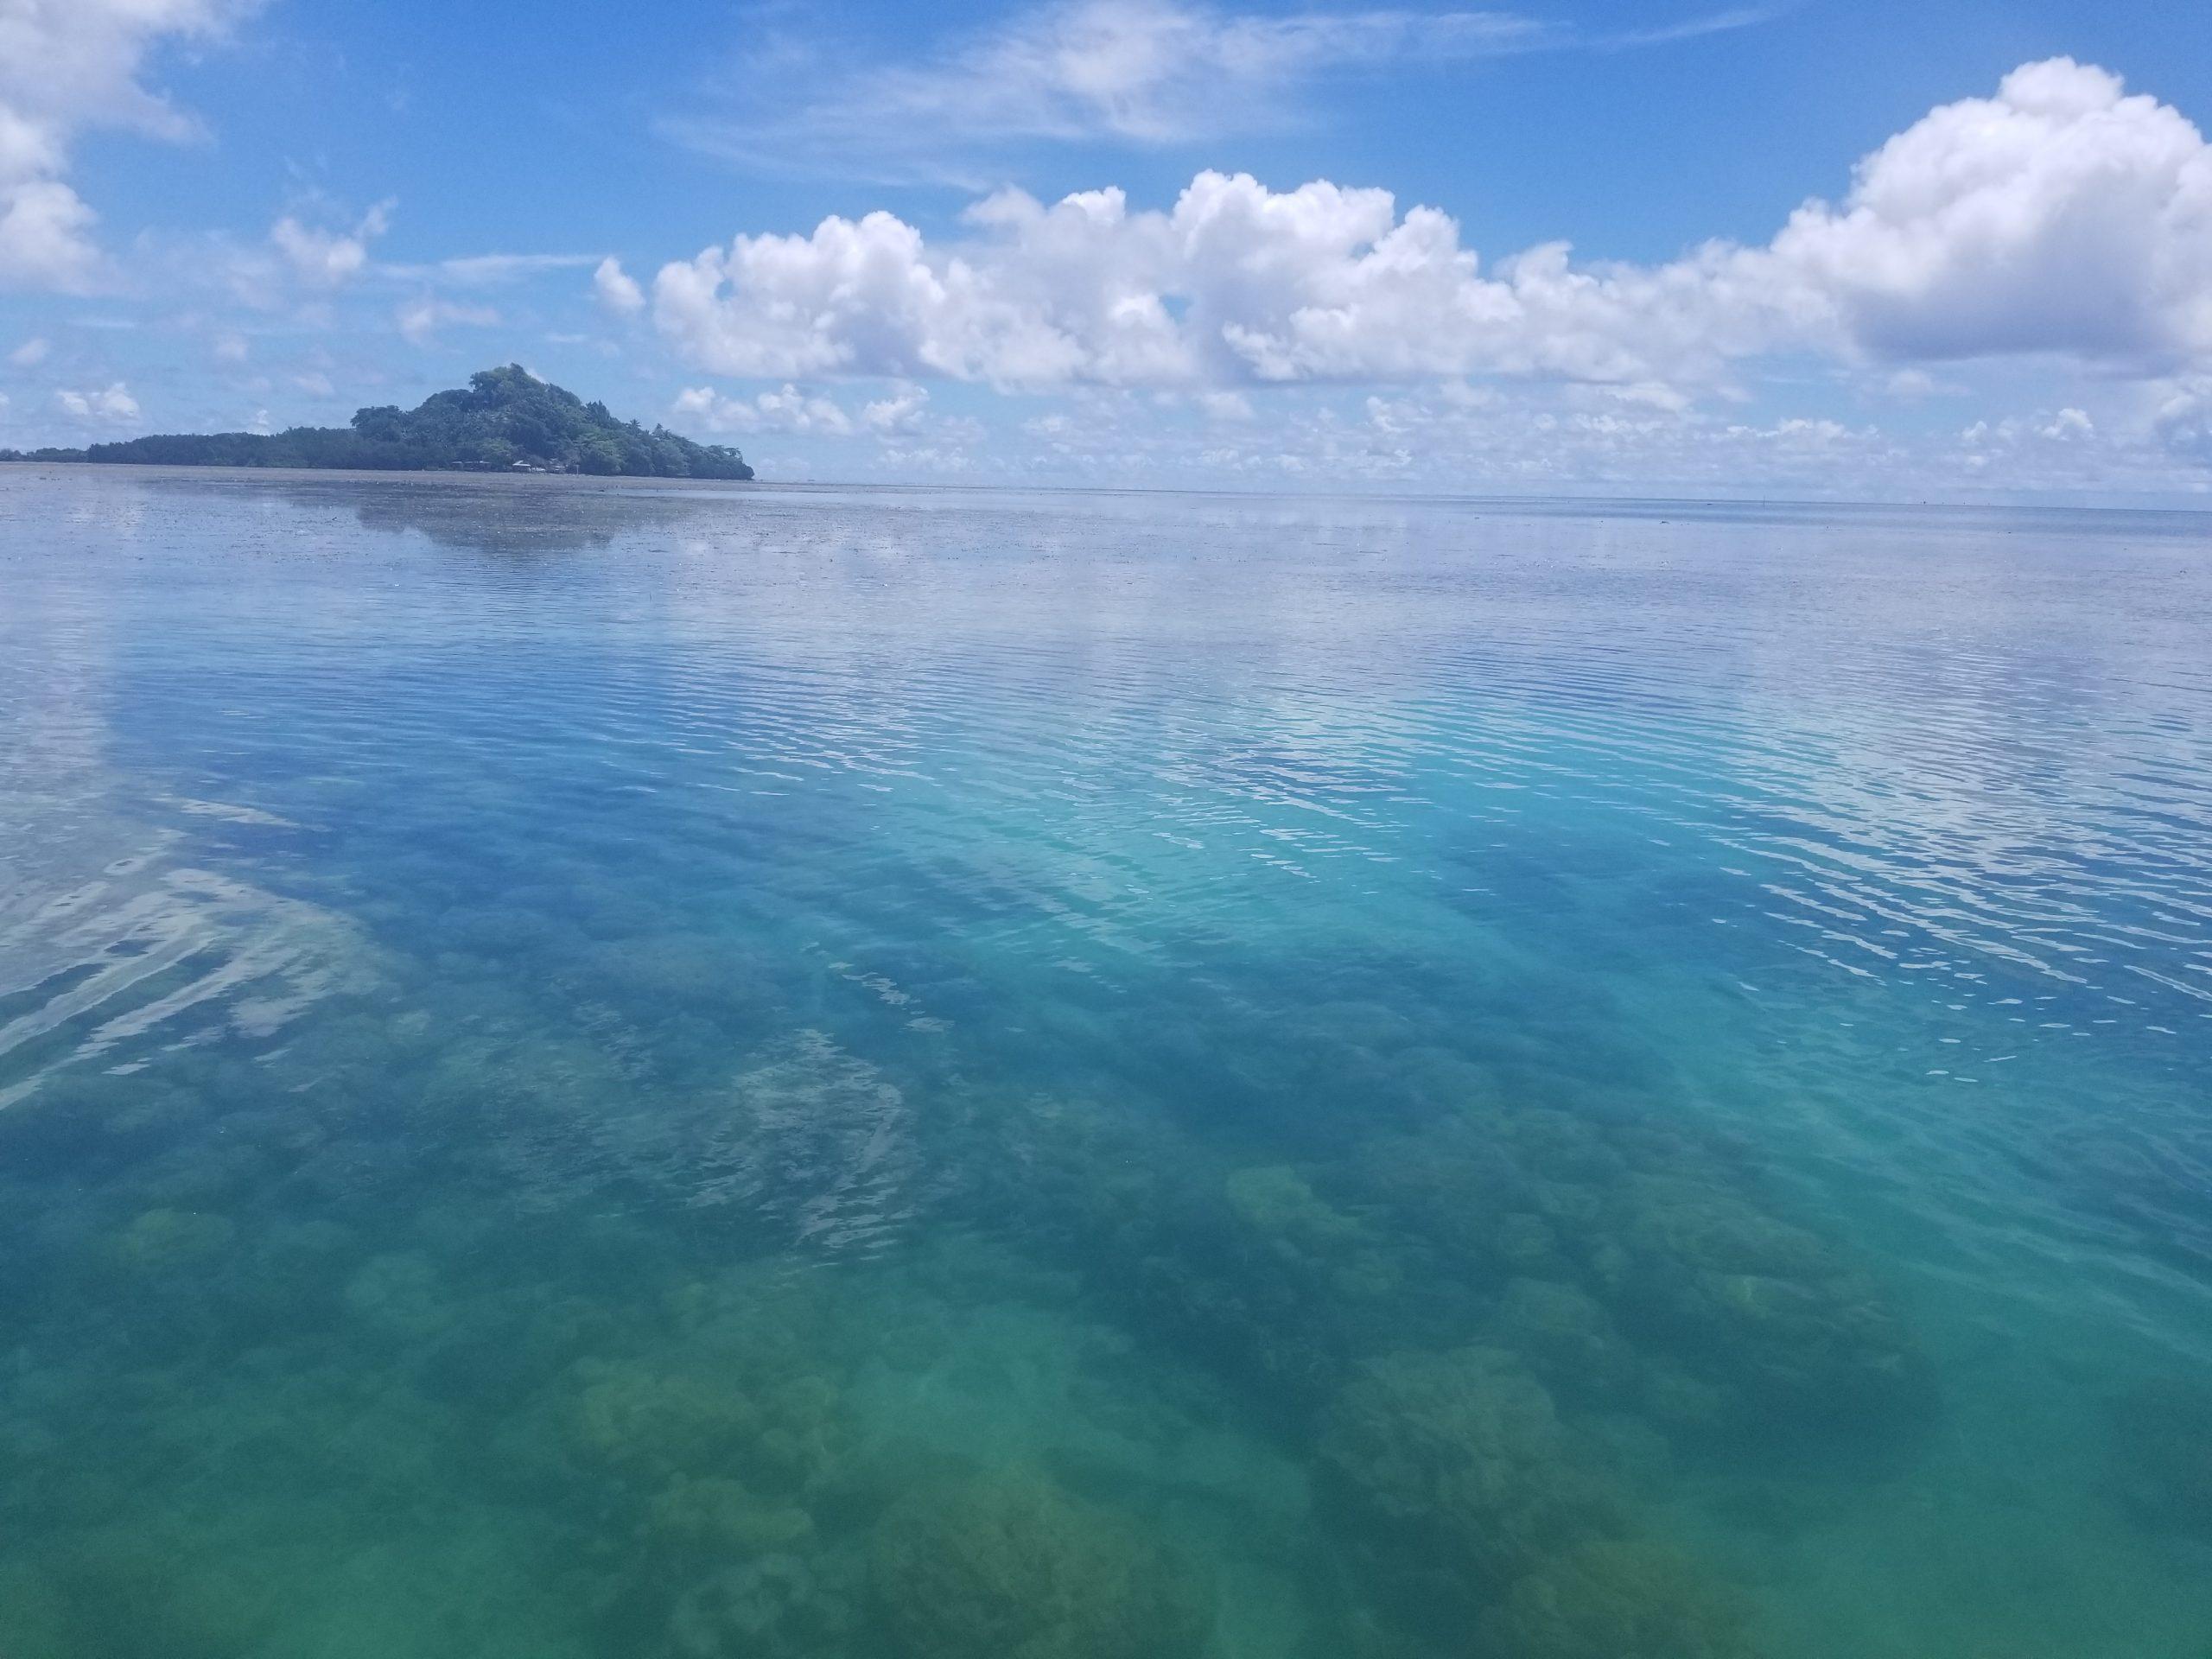 The waters of Pohnpei were like glass.